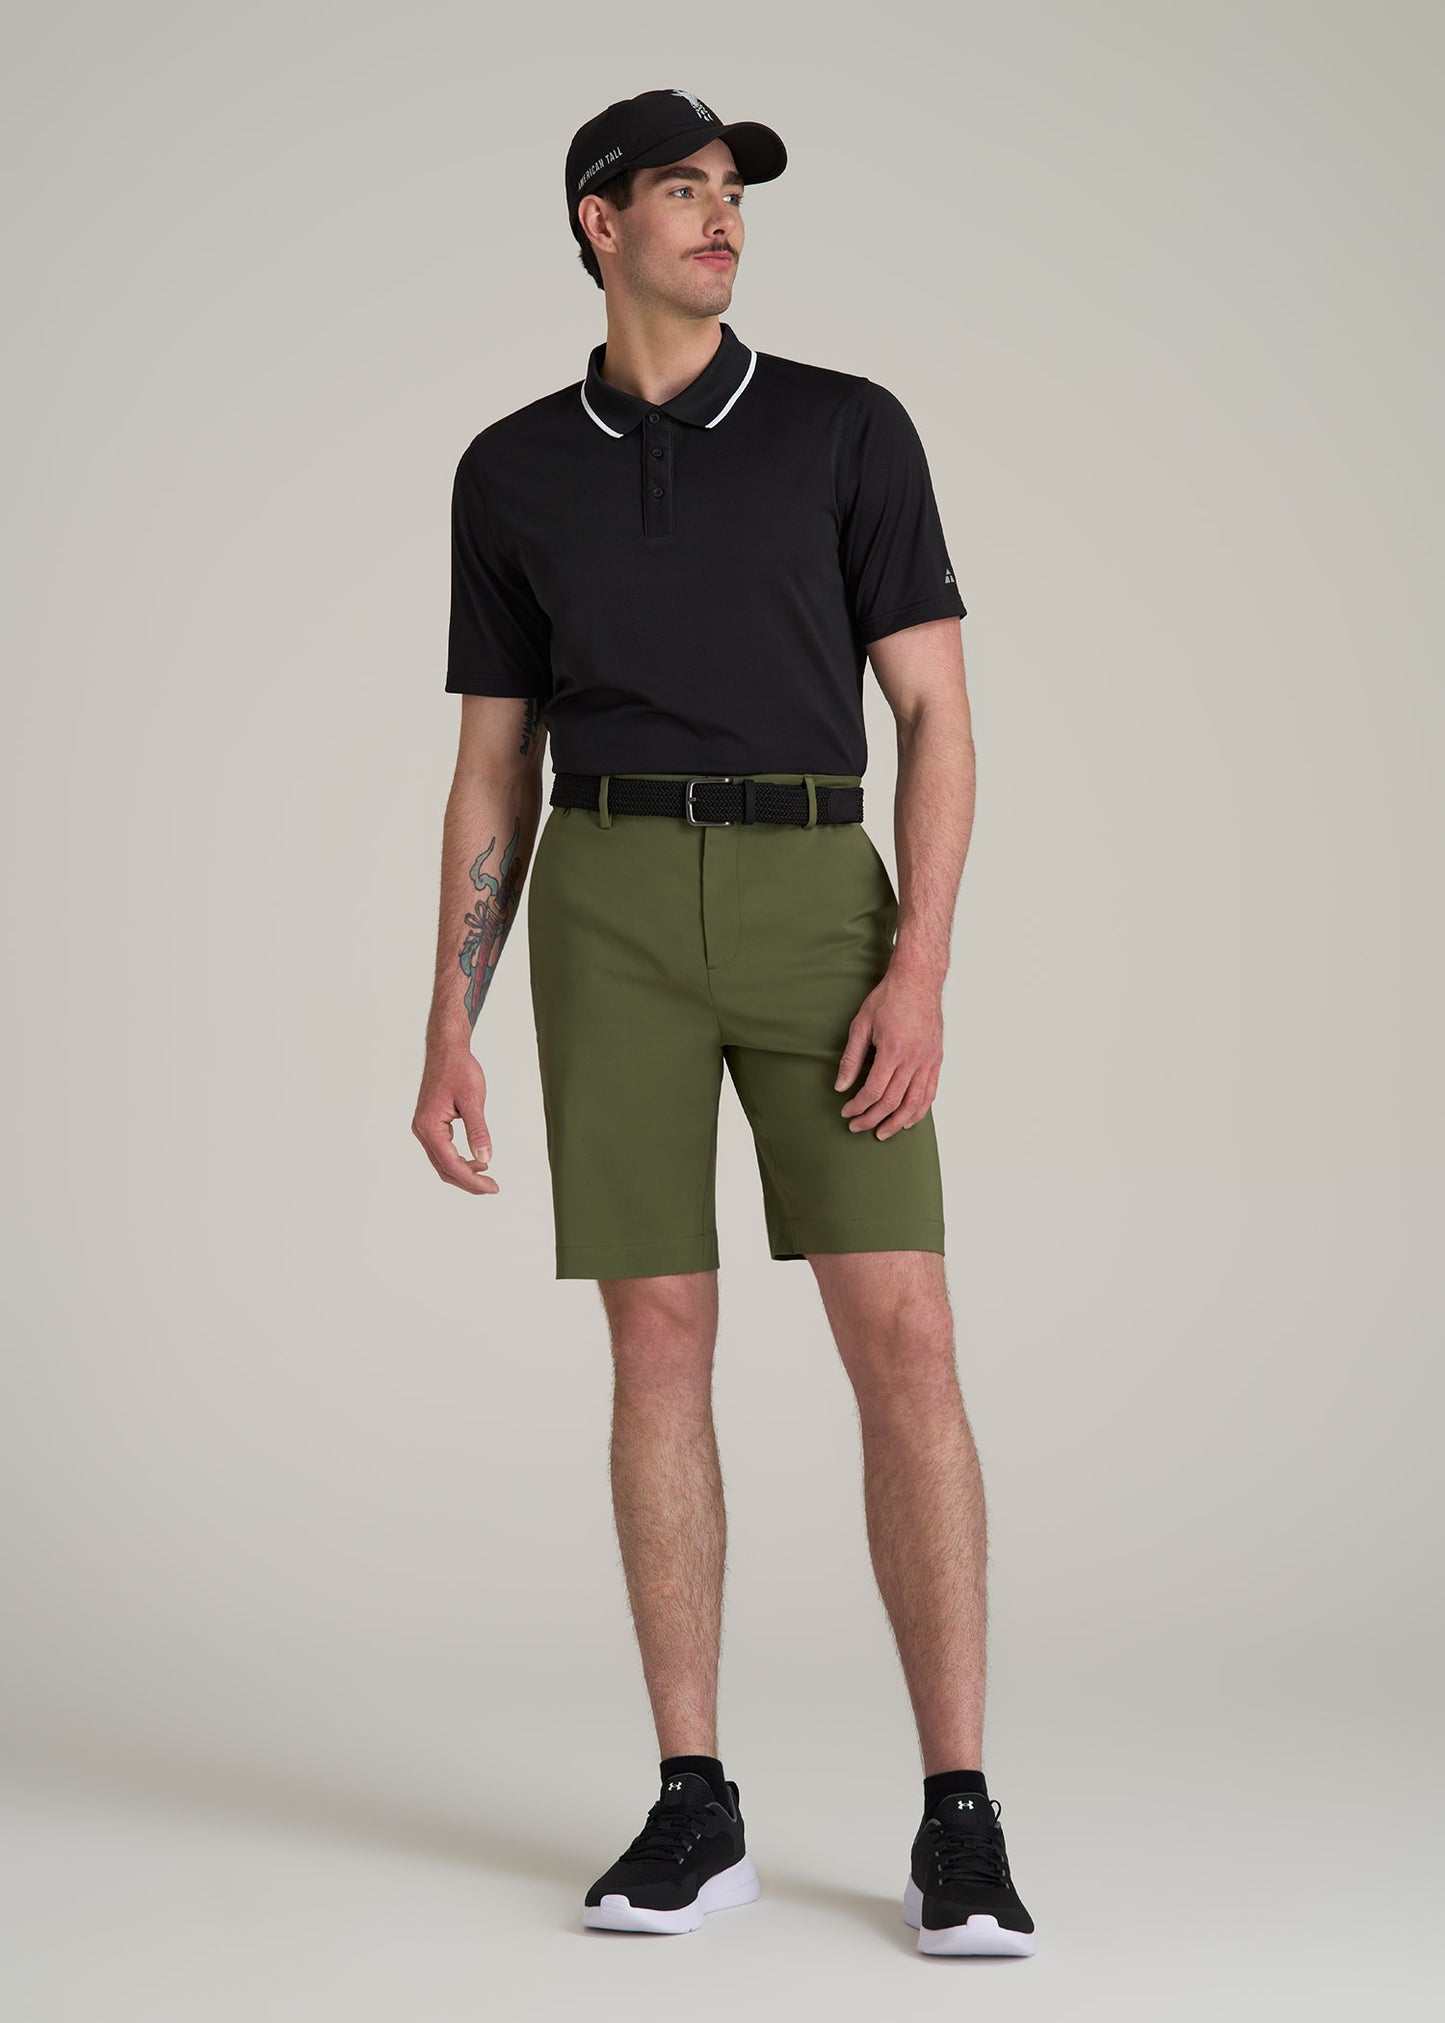 A tall man wearing American Tall's Tech Chino Shorts in Bright Olive, Performance Tipped Golf Polo in Black and a Stretch Woven Belt in Black.